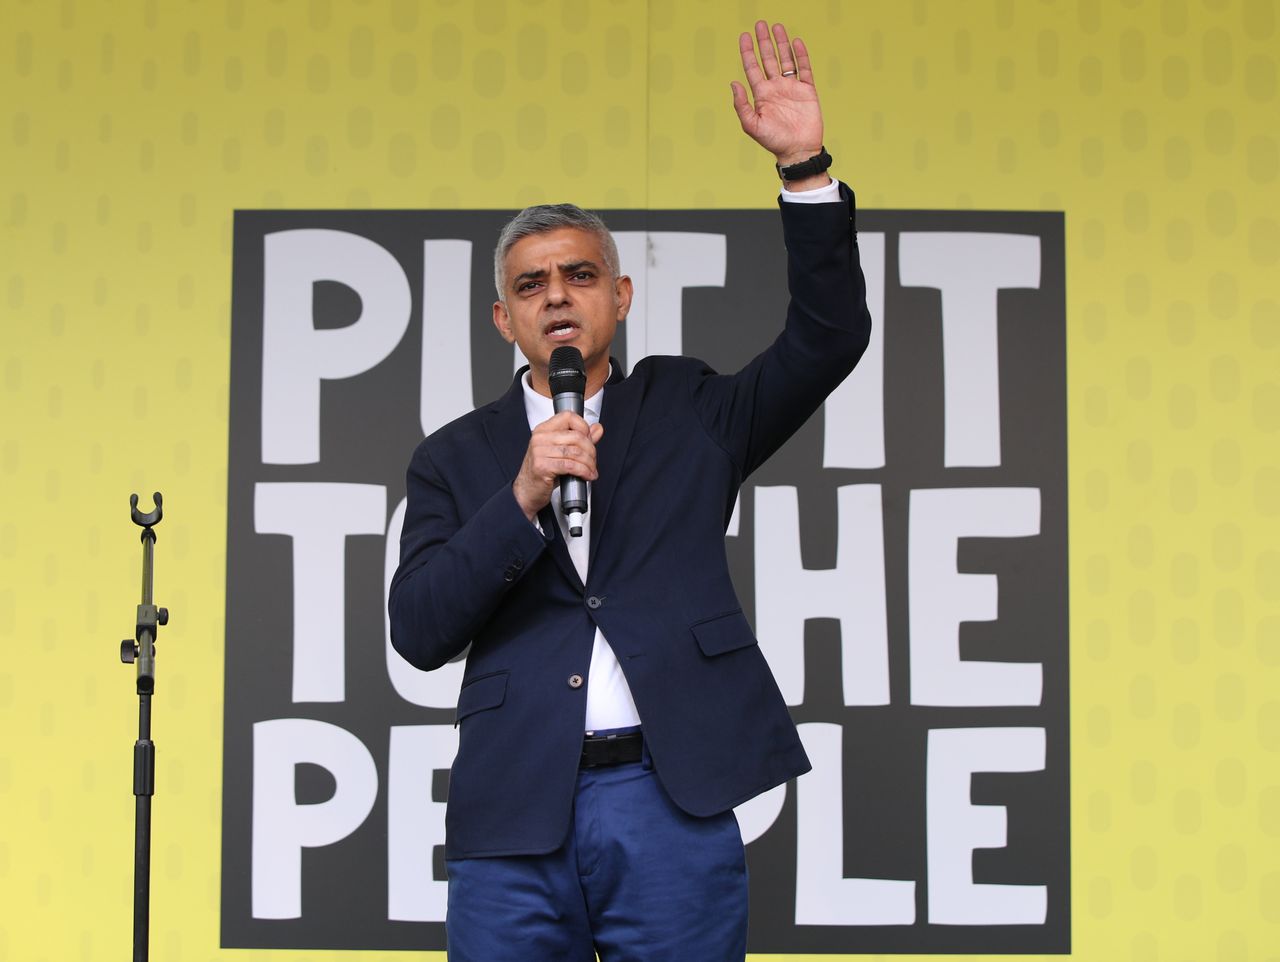 Sadiq Khan addresses anti-Brexit campaigners in Parliament Square as they take part in the People's Vote March in London.